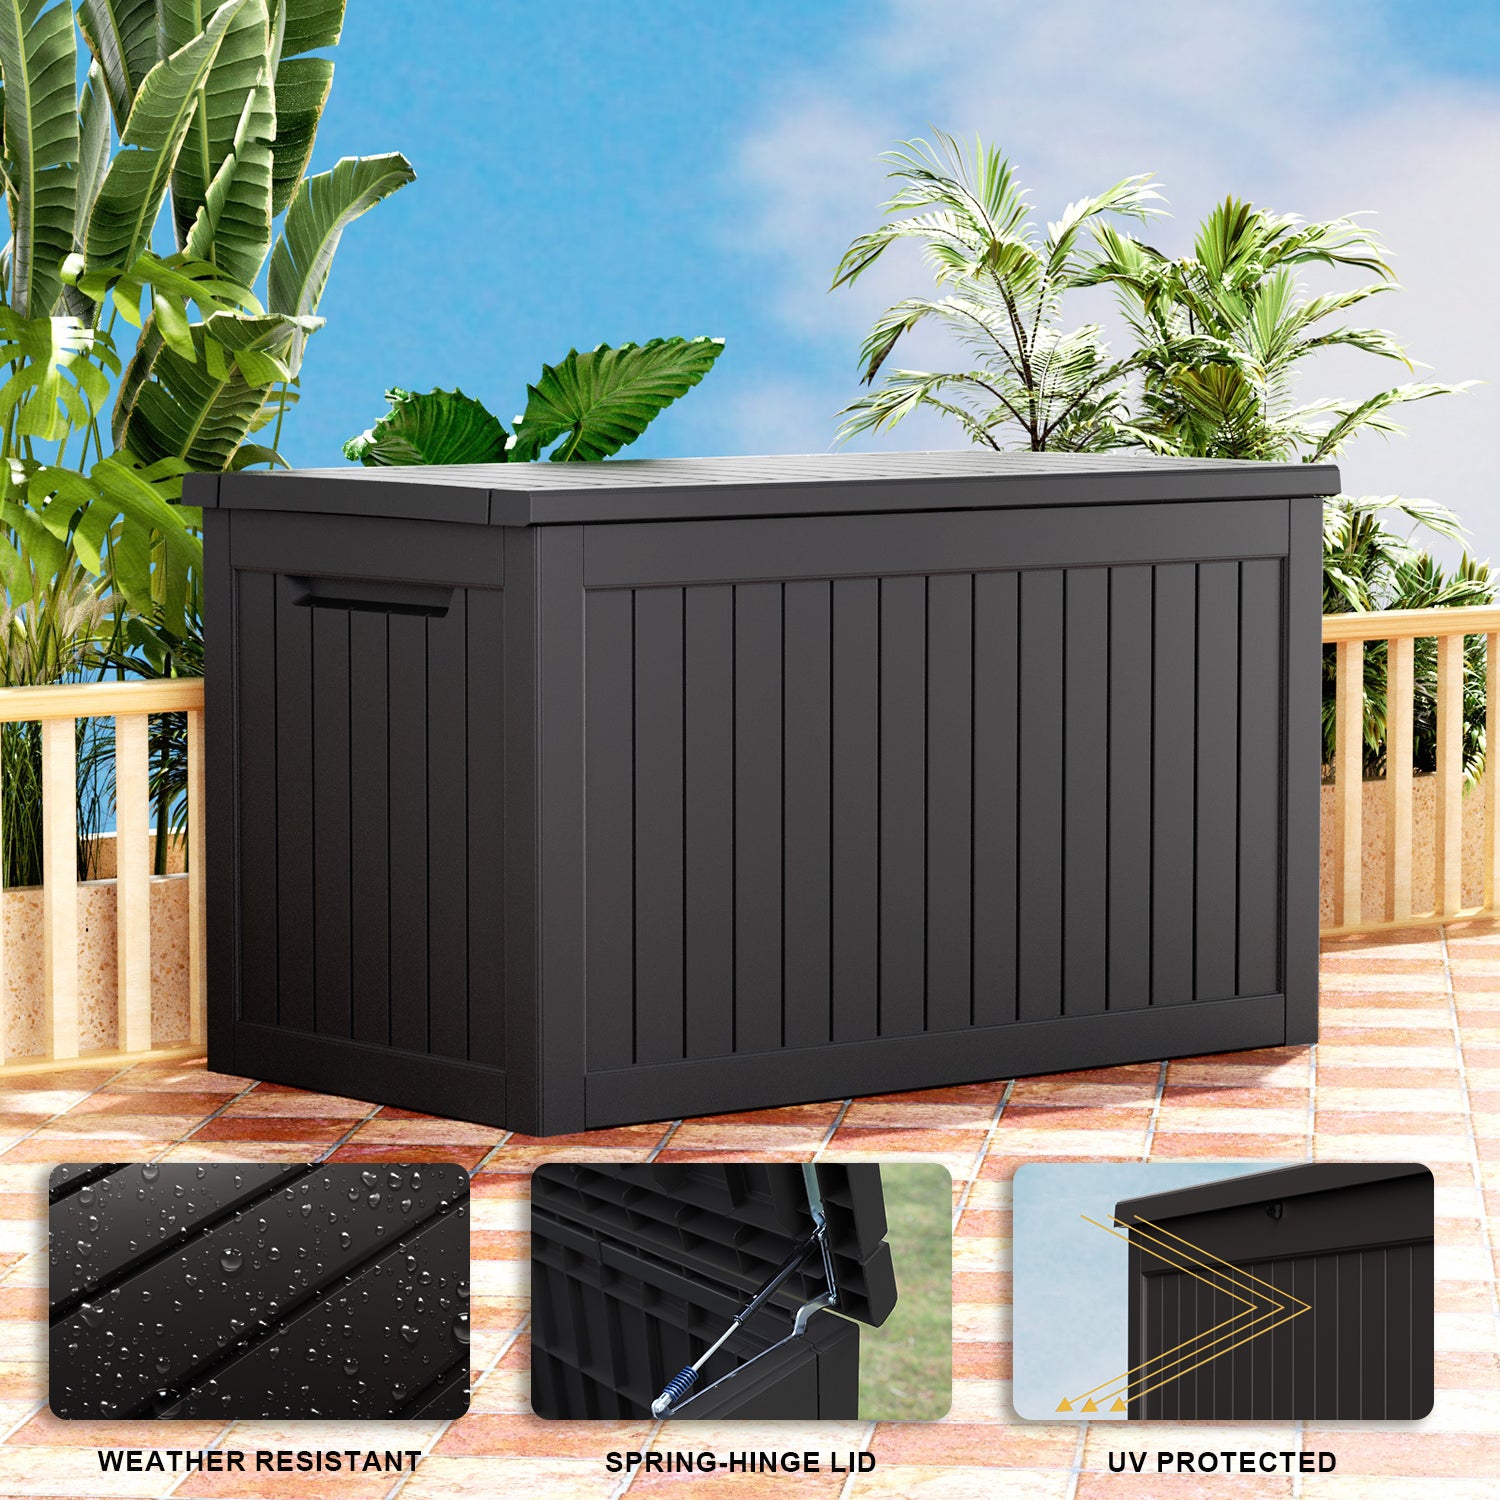 230 Gallon recyclable eco-friendly resin material storage Deck Box